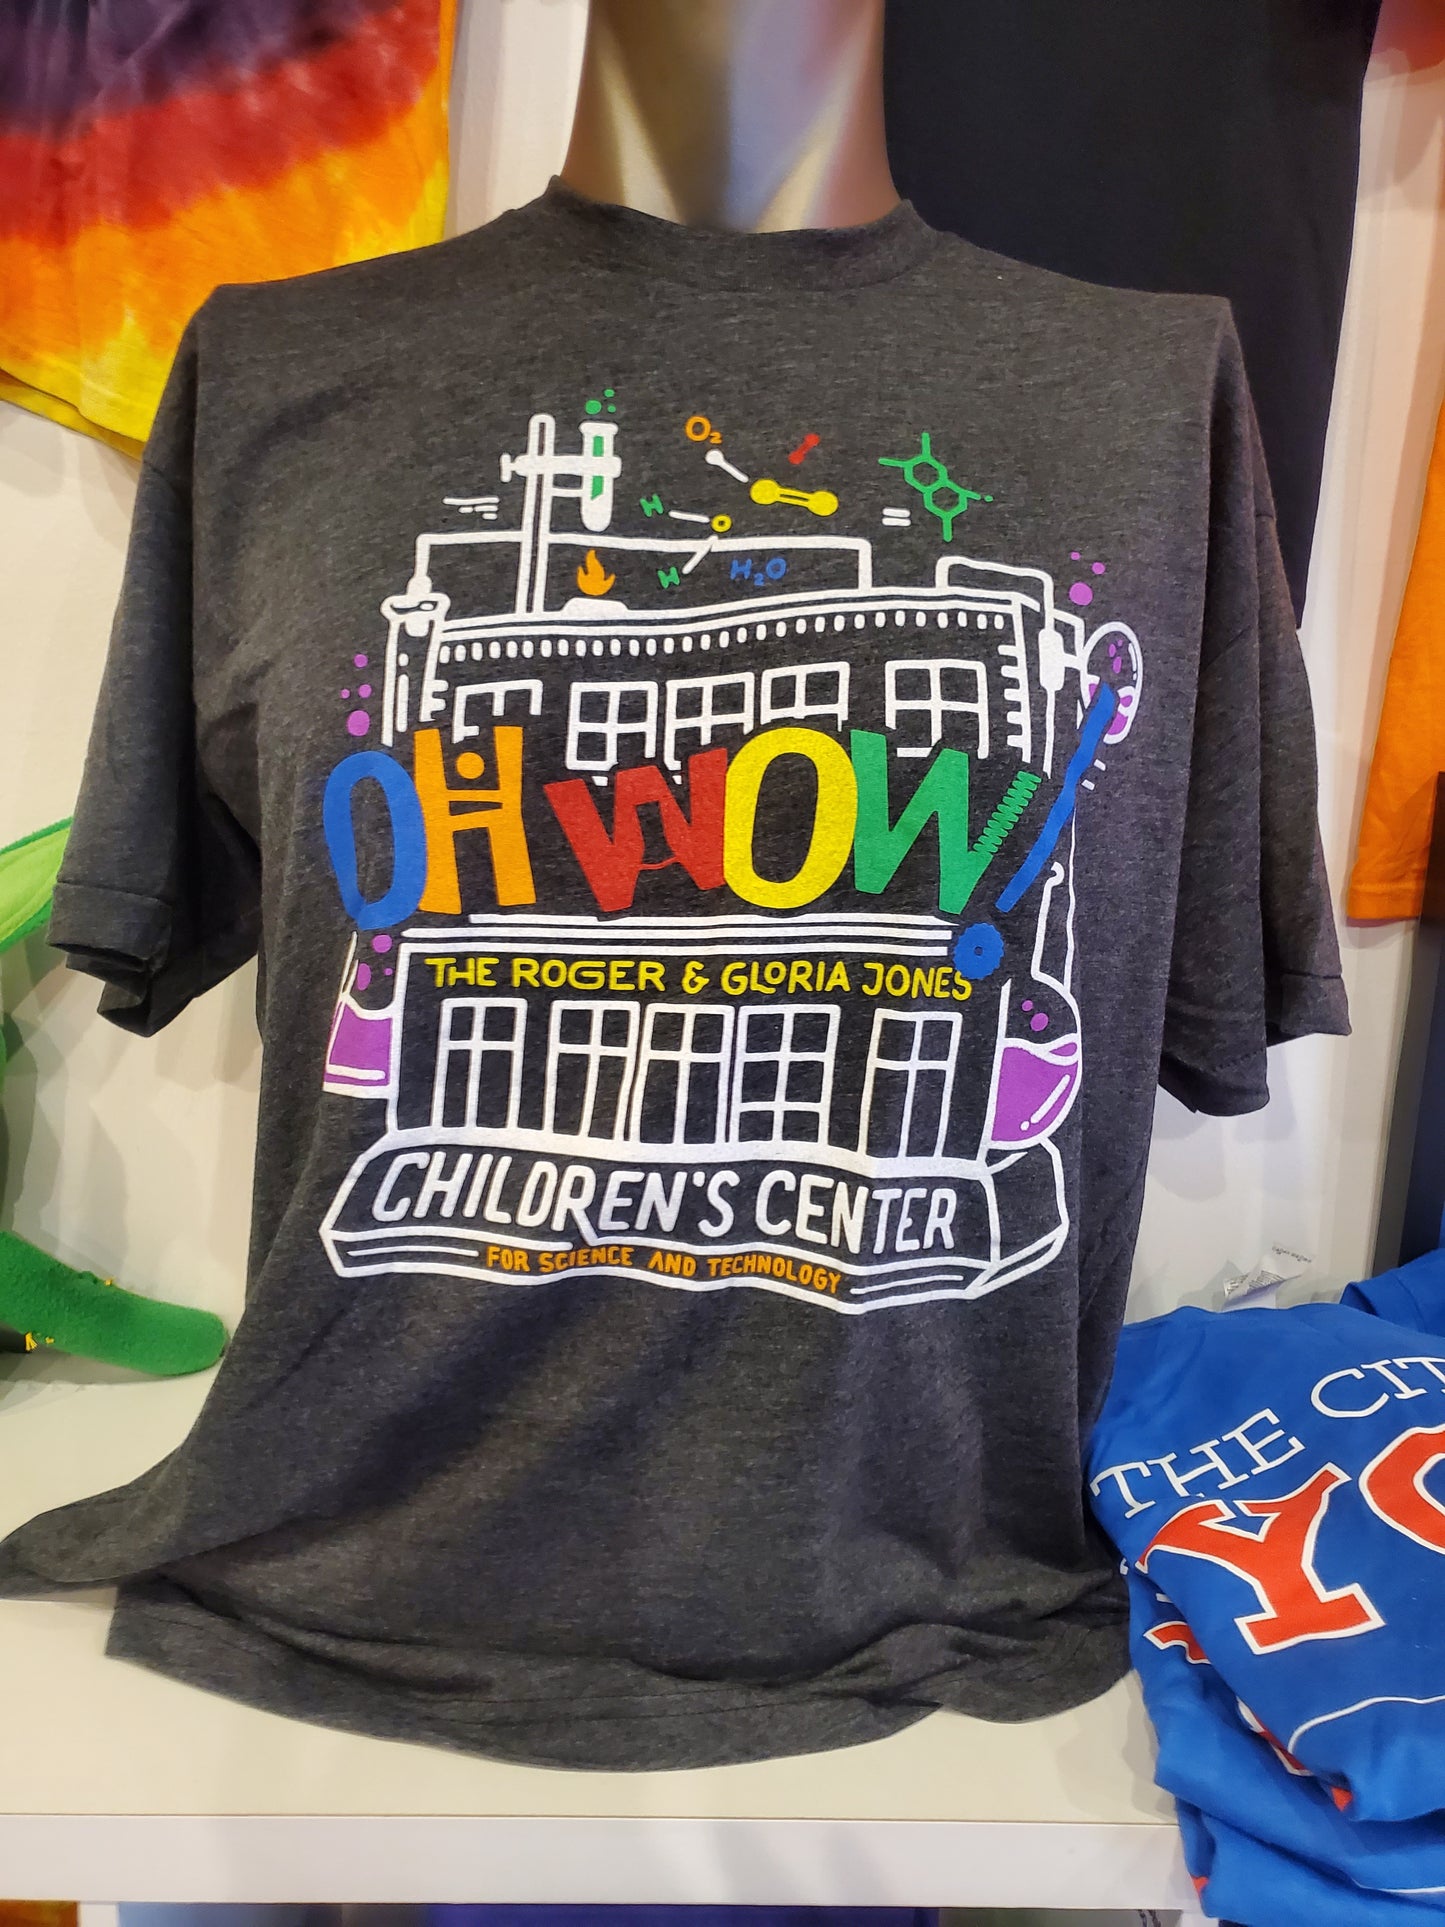 OH WOW! T-shirts